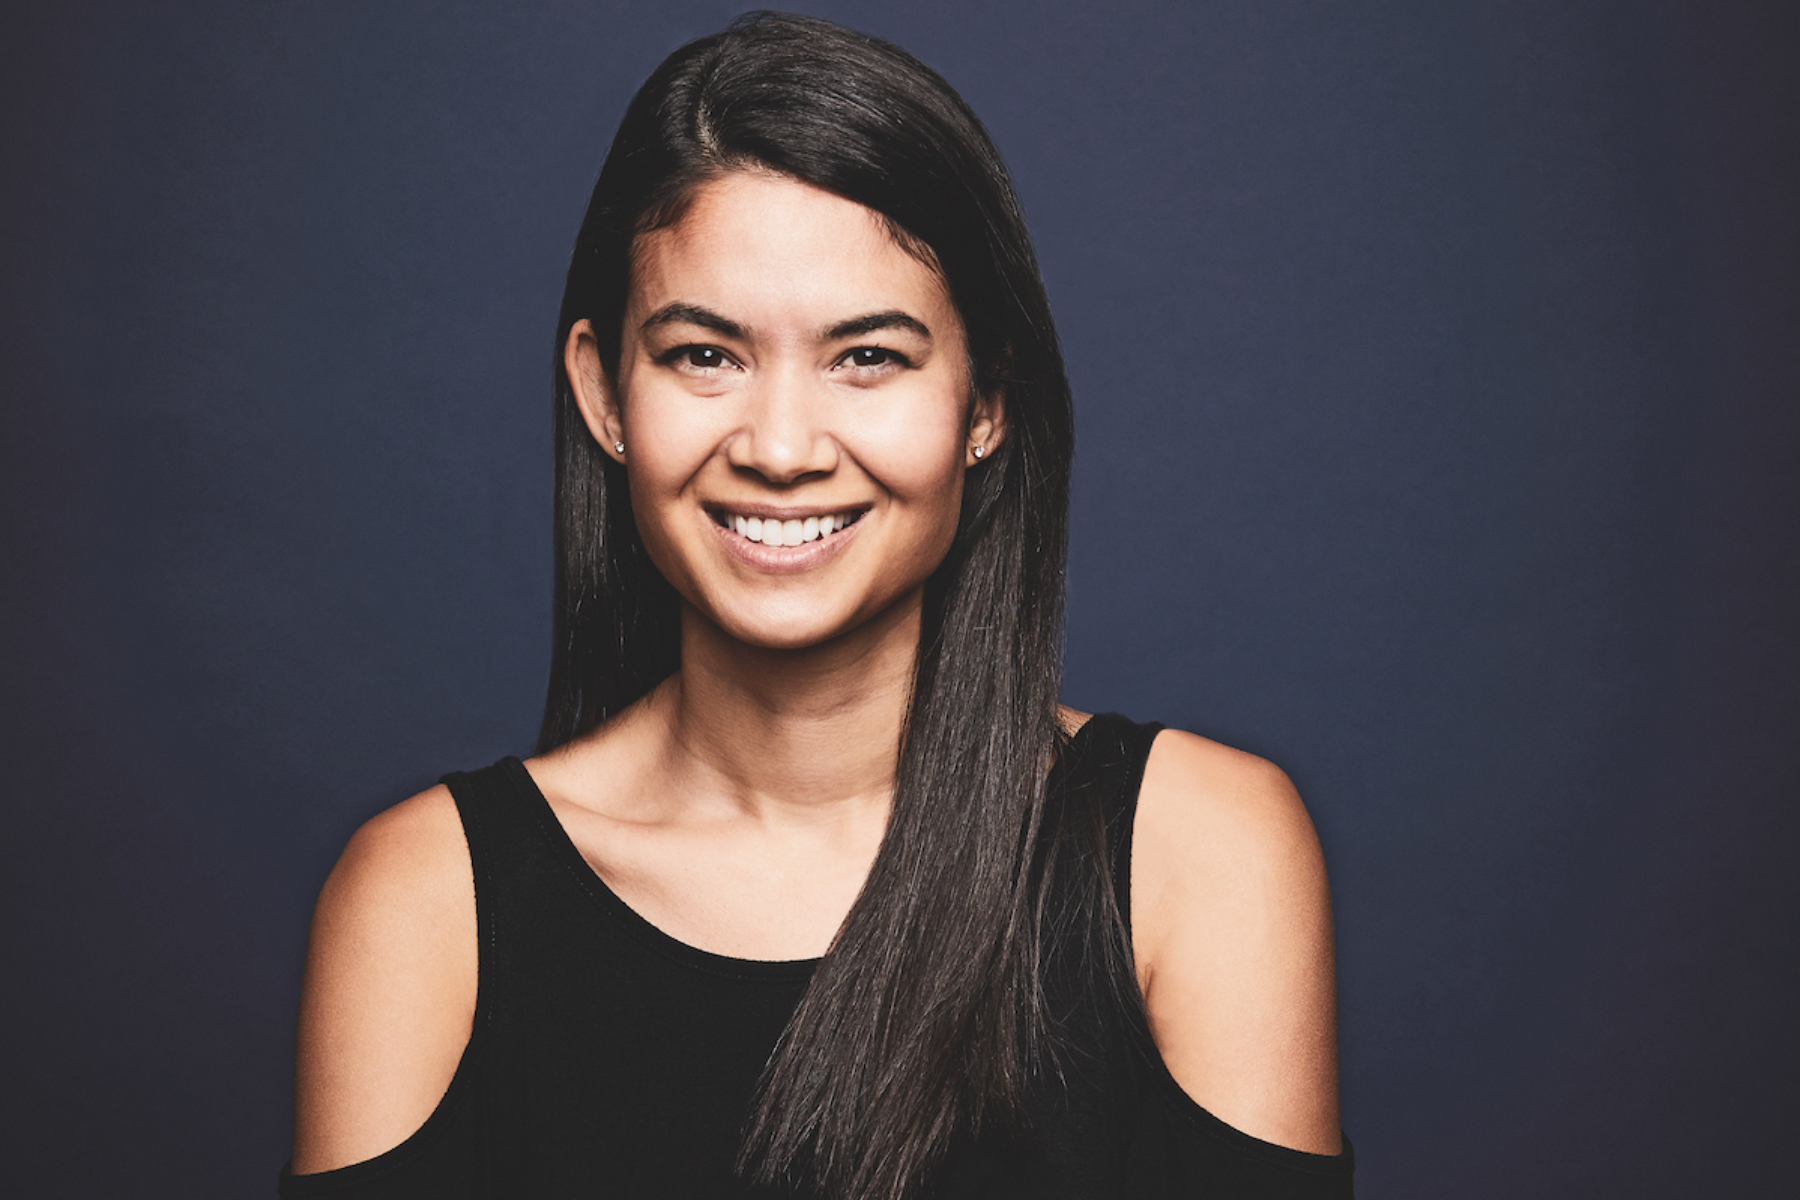 Melanie Perkins and Cliff Obrecht co-founded Canva - one of Australia's most successful start-up unicorns ever.